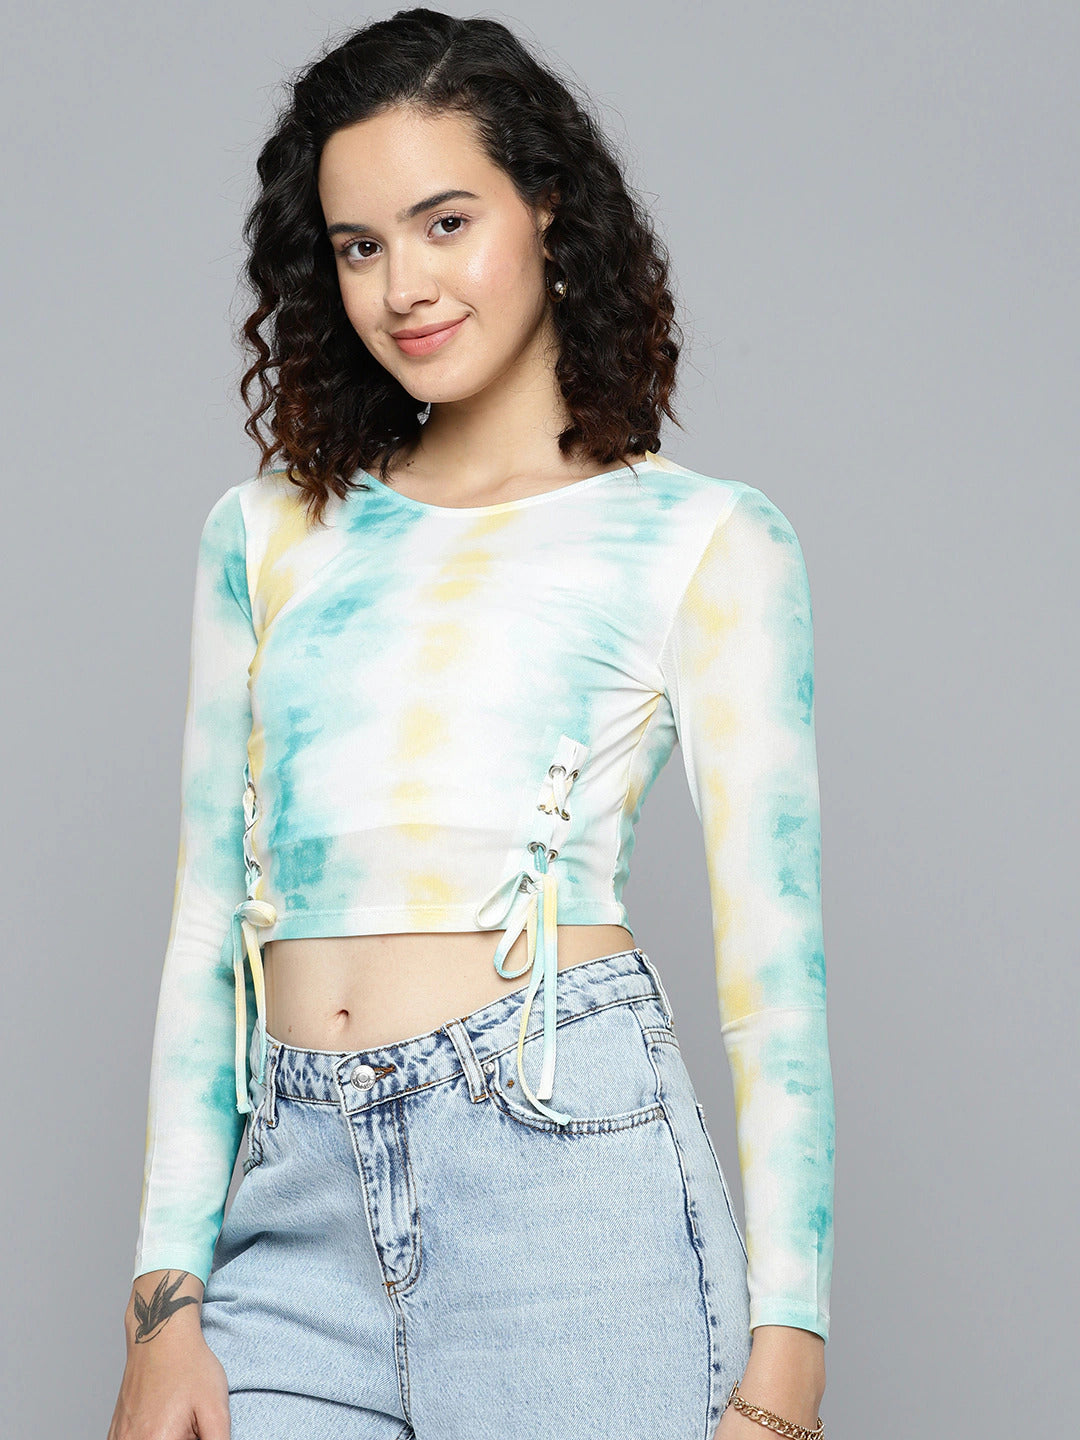 Sunset Tie-Dye Cotton Printed Top - Green